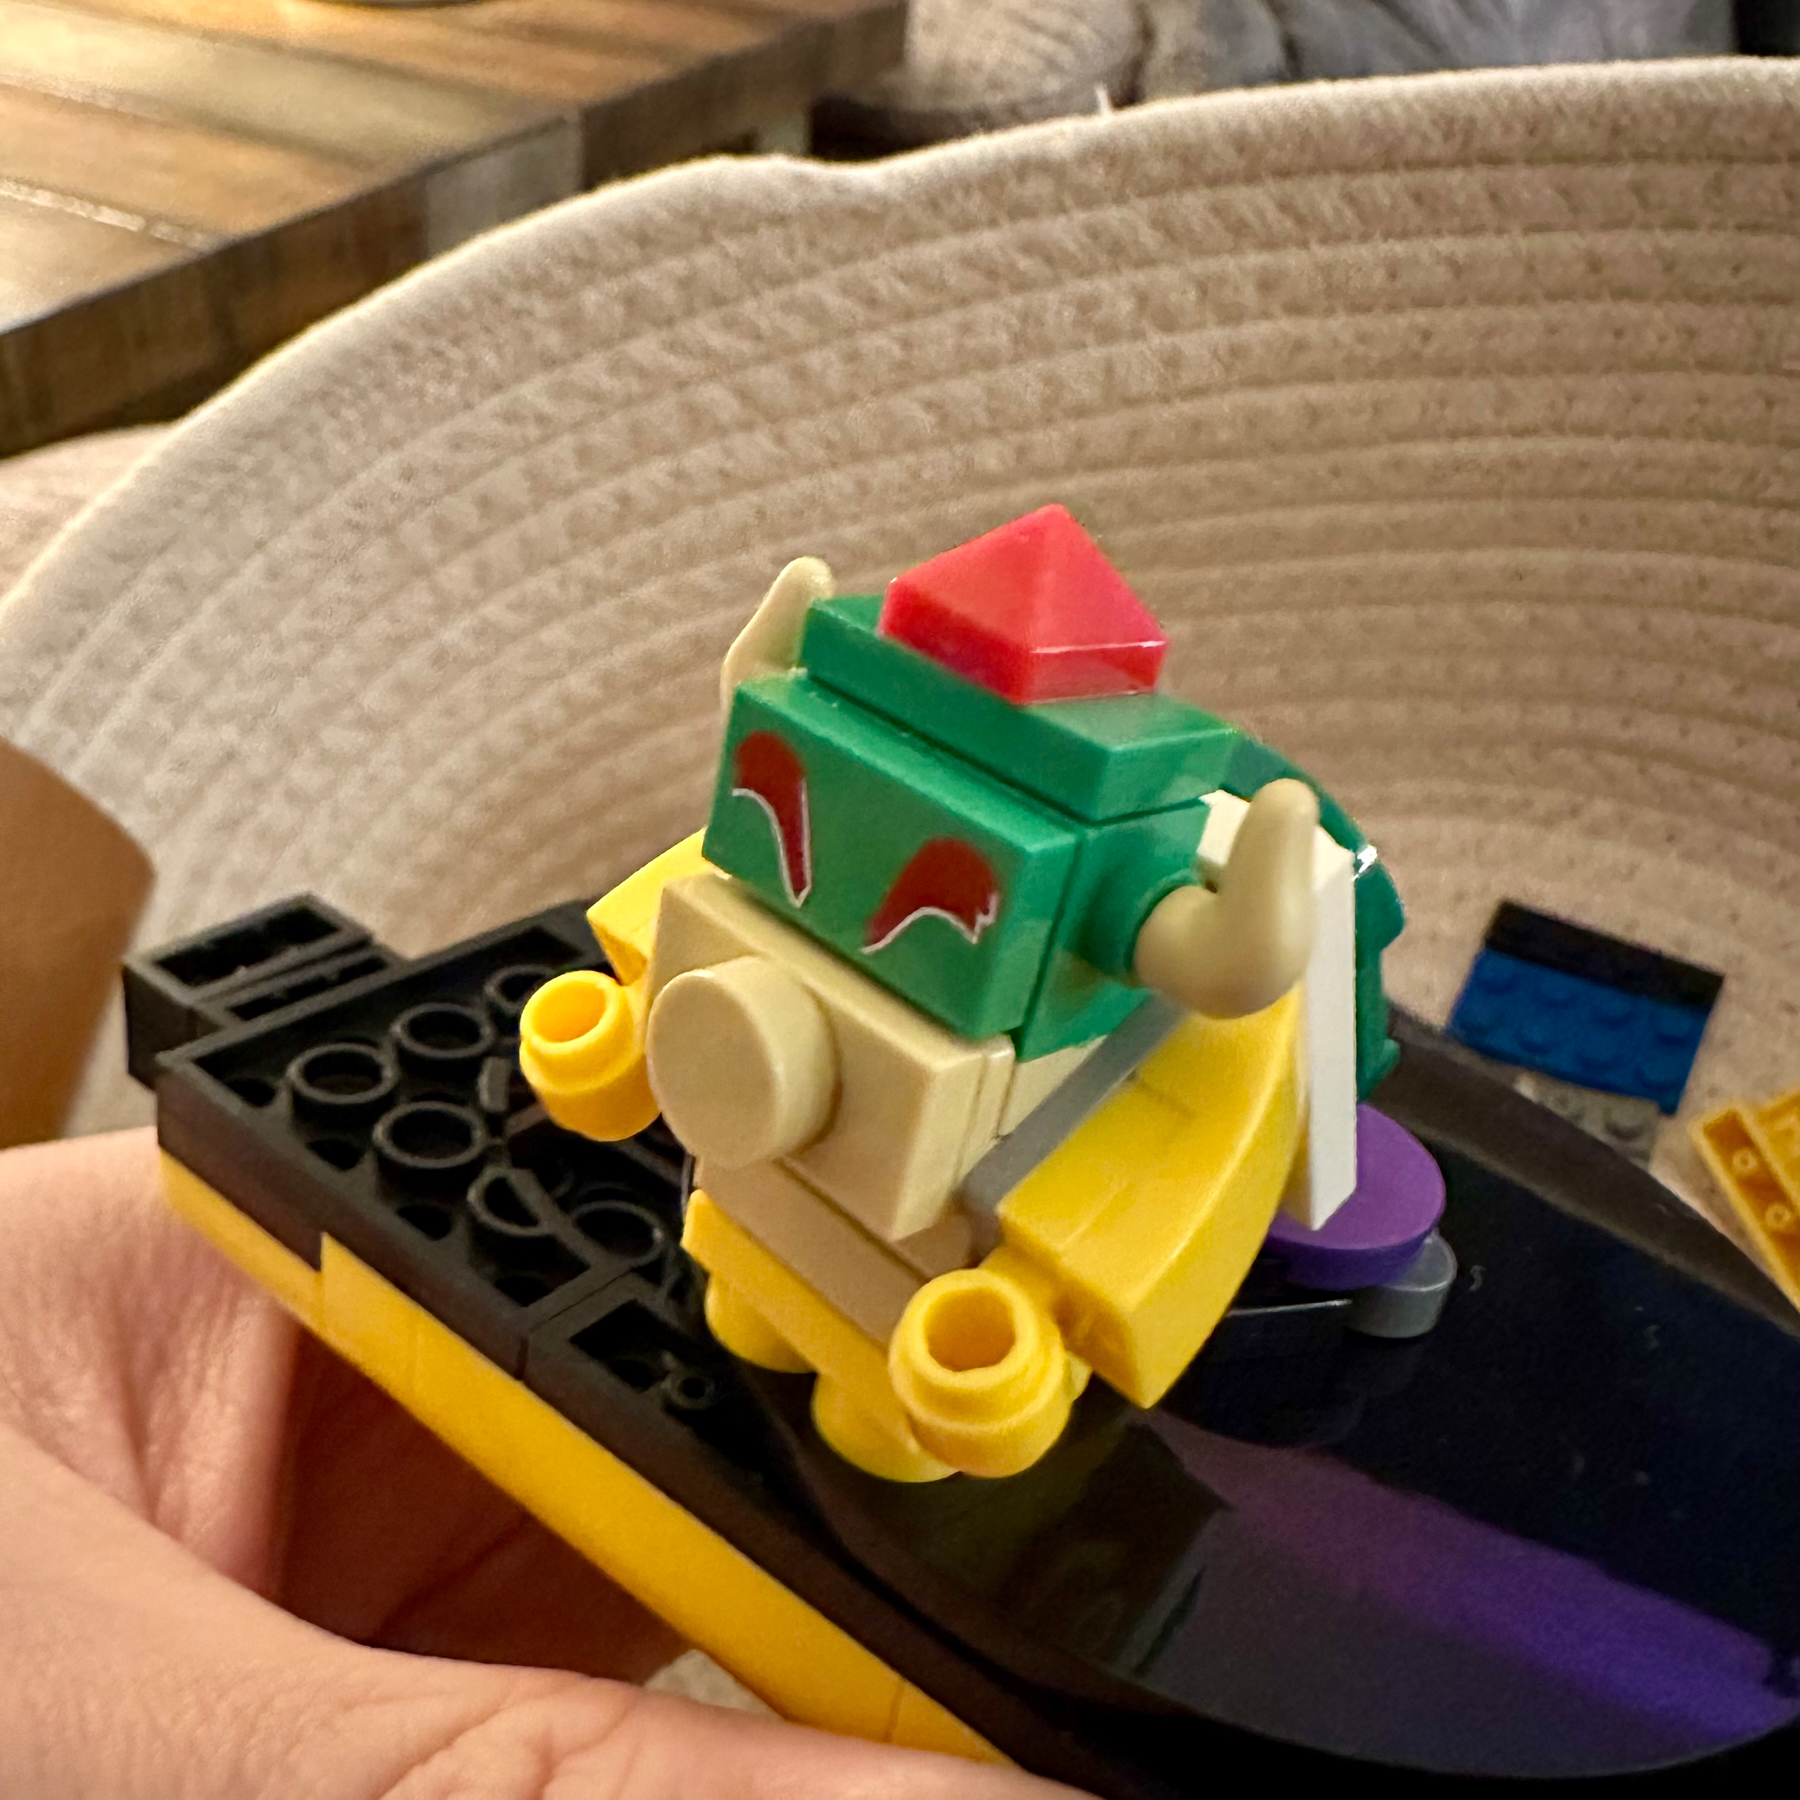 A LEGO model resembling a dinosaur head with red eyes is held over a table, with a hand partially visible in the frame.